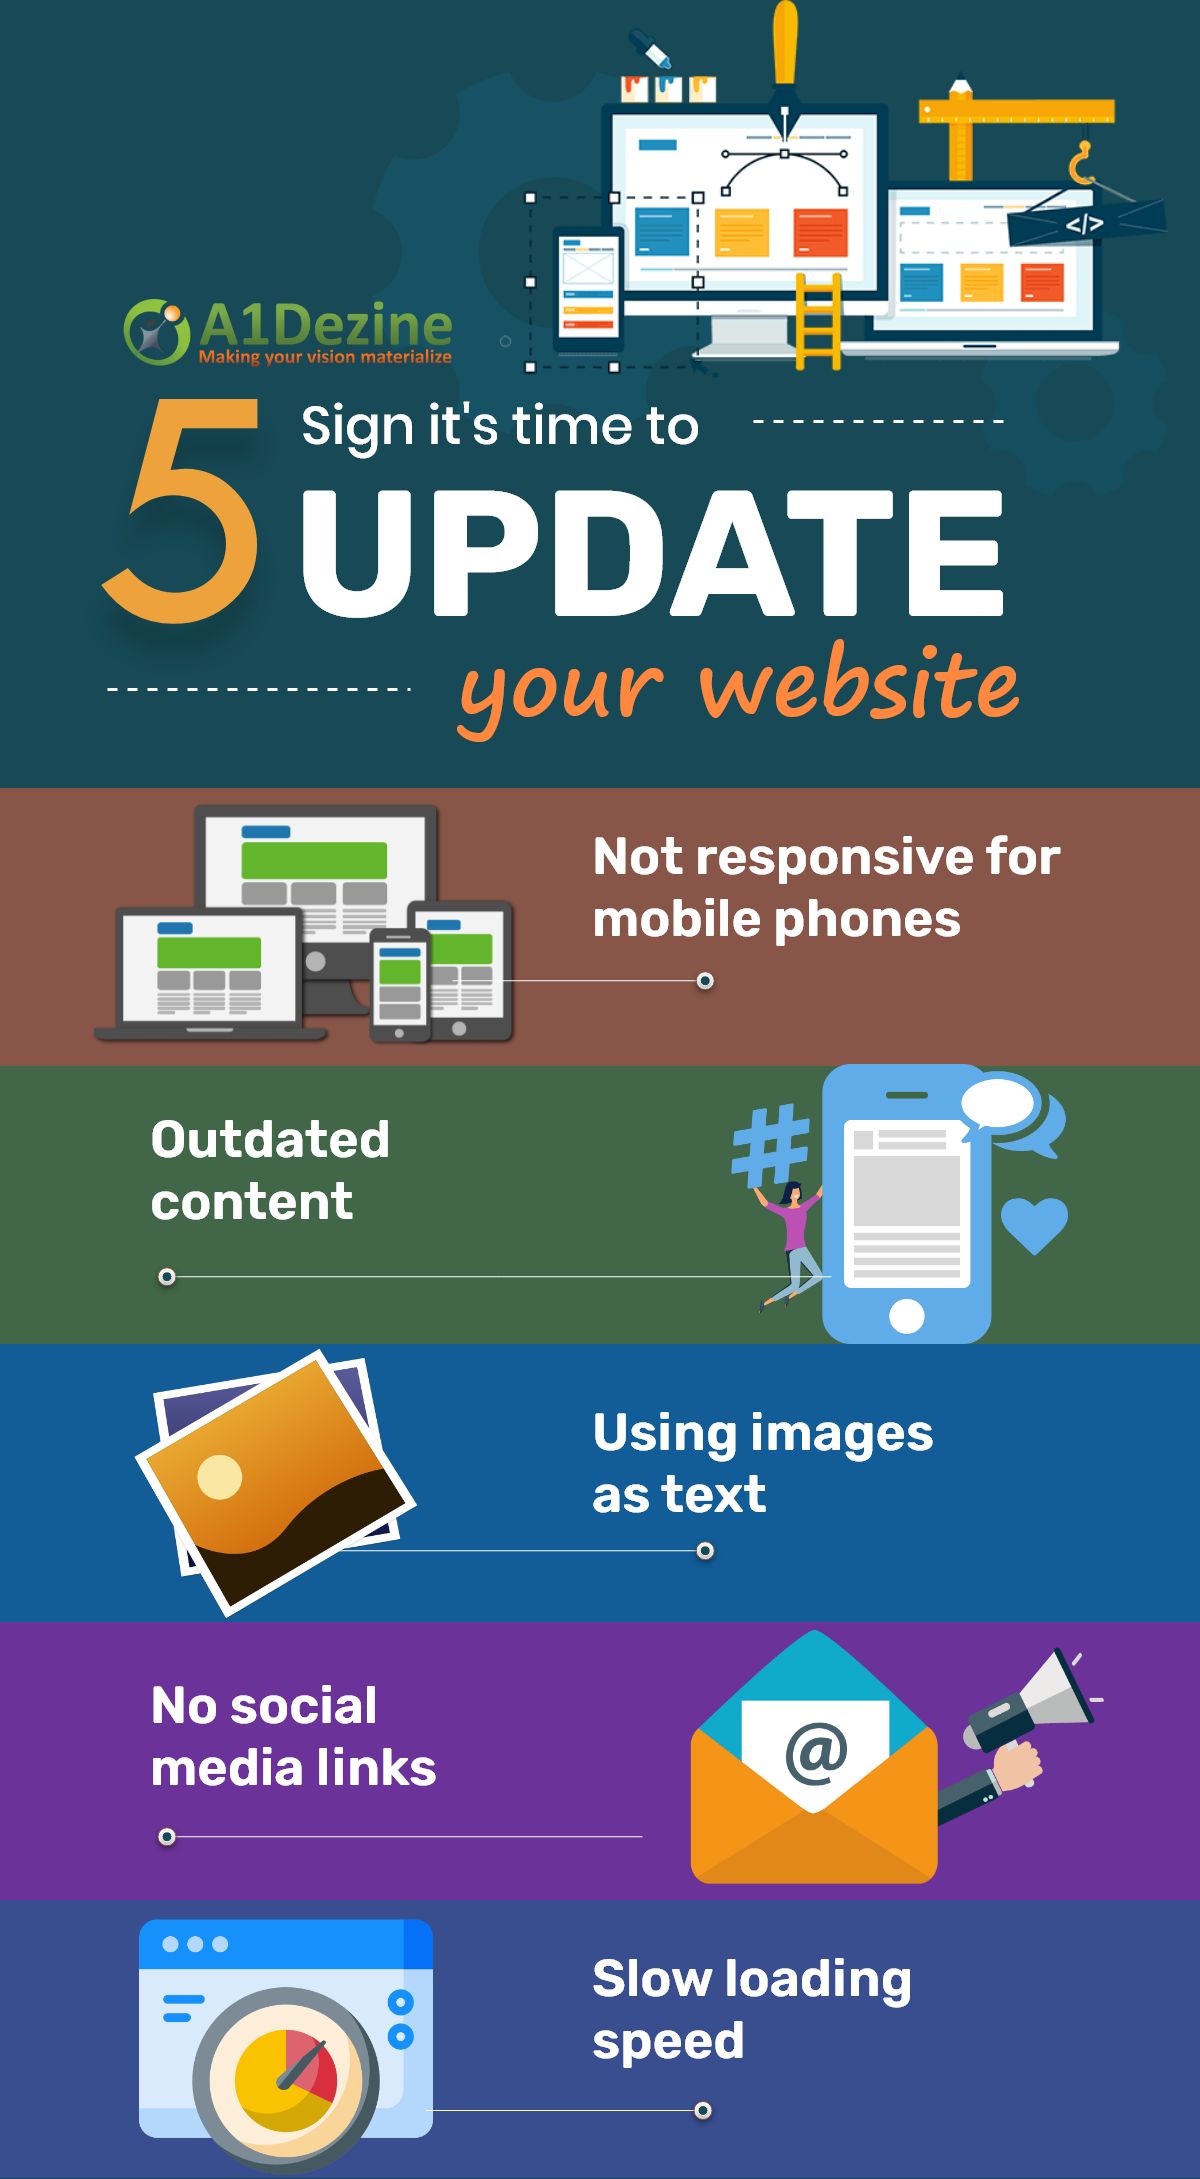 5 SIGNS IT’S TIME TO UPDATE YOUR WEBSITE